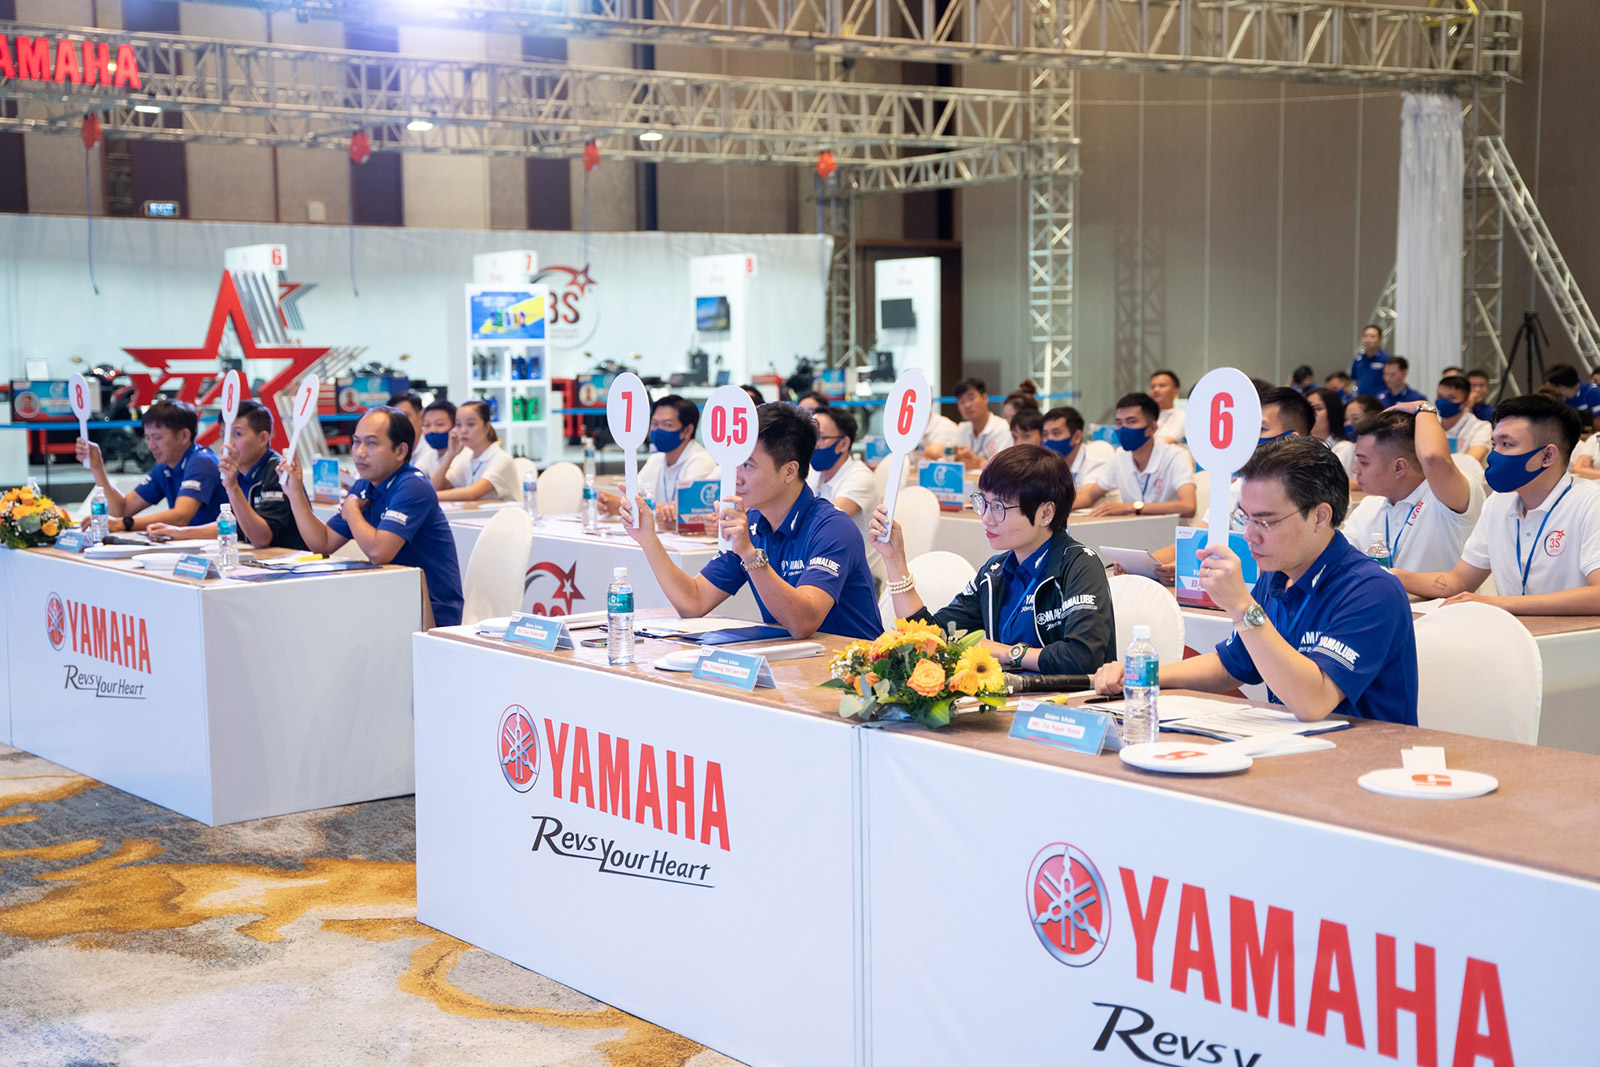 NATIONAL 3S YAMAHA TOWN SKILLS COMPETITION 2022 AT ARIYANA CONVENTION CENTRE